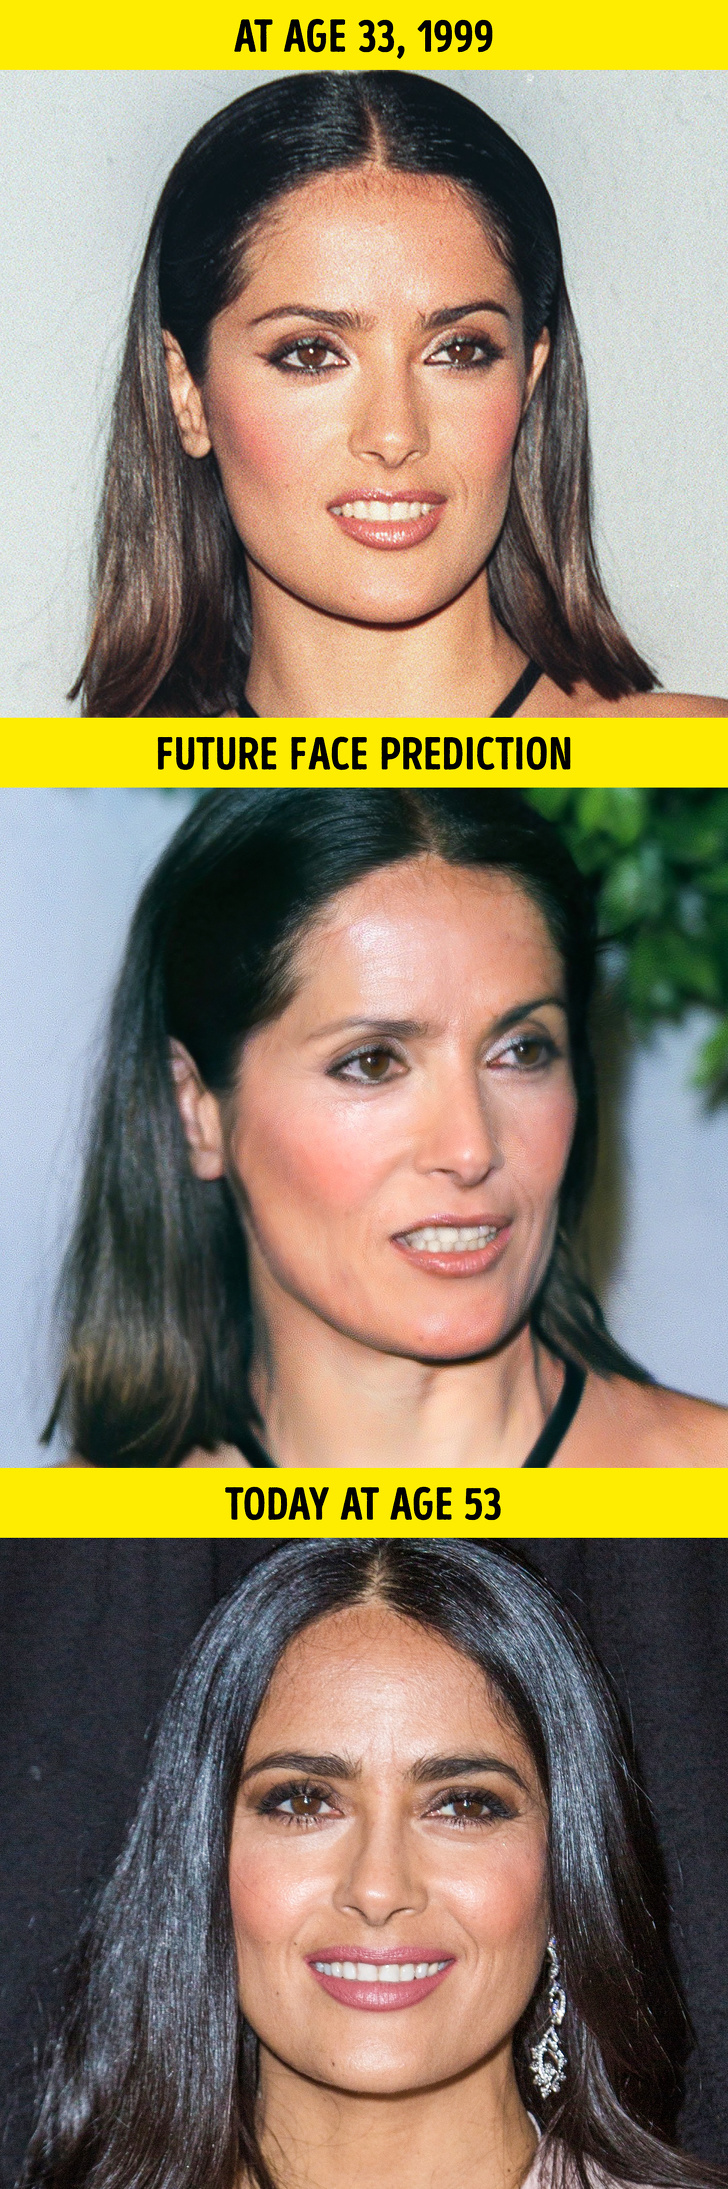 A Plastic Surgeon Reveals How 10 Celebrities Would Look If They Aged Like Average People